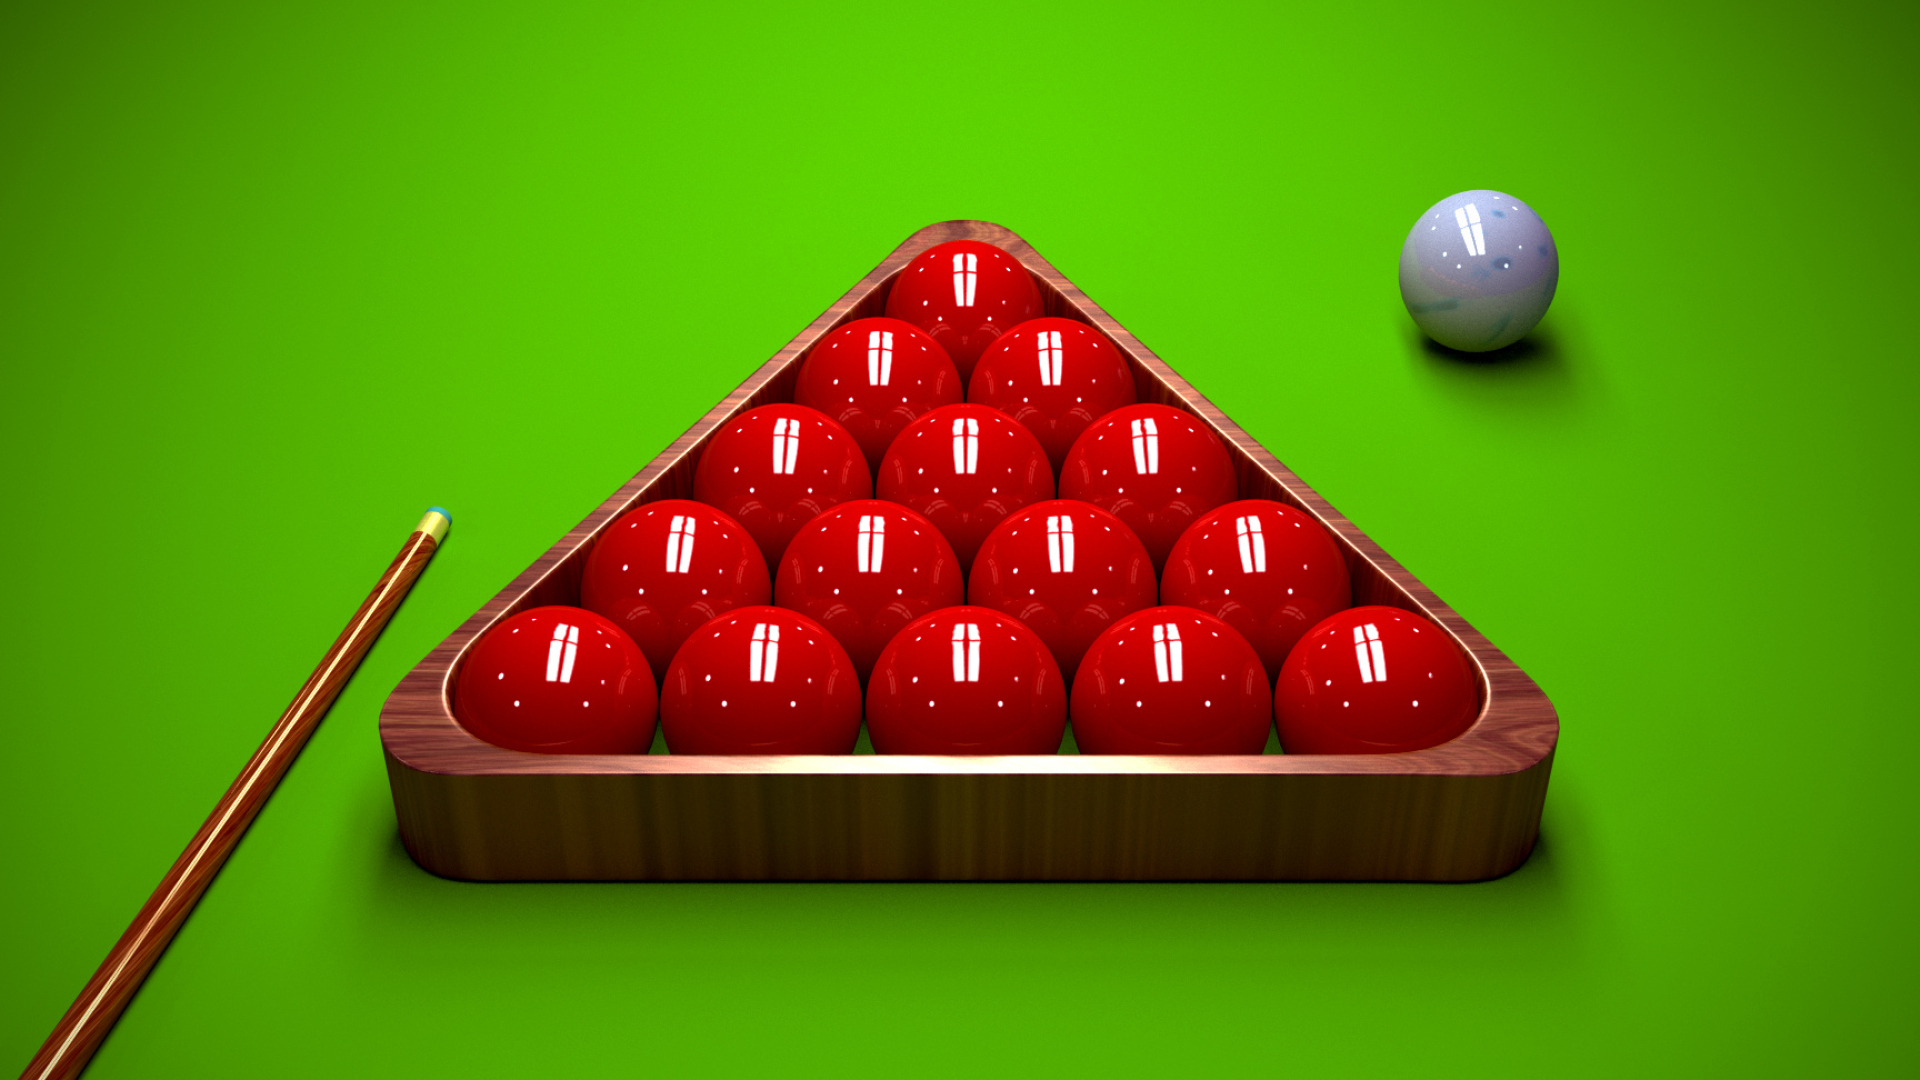 Cue Sports: Classic snooker game that is played with twenty-two balls - a cue ball, fifteen red balls, and six other balls. 1920x1080 Full HD Background.